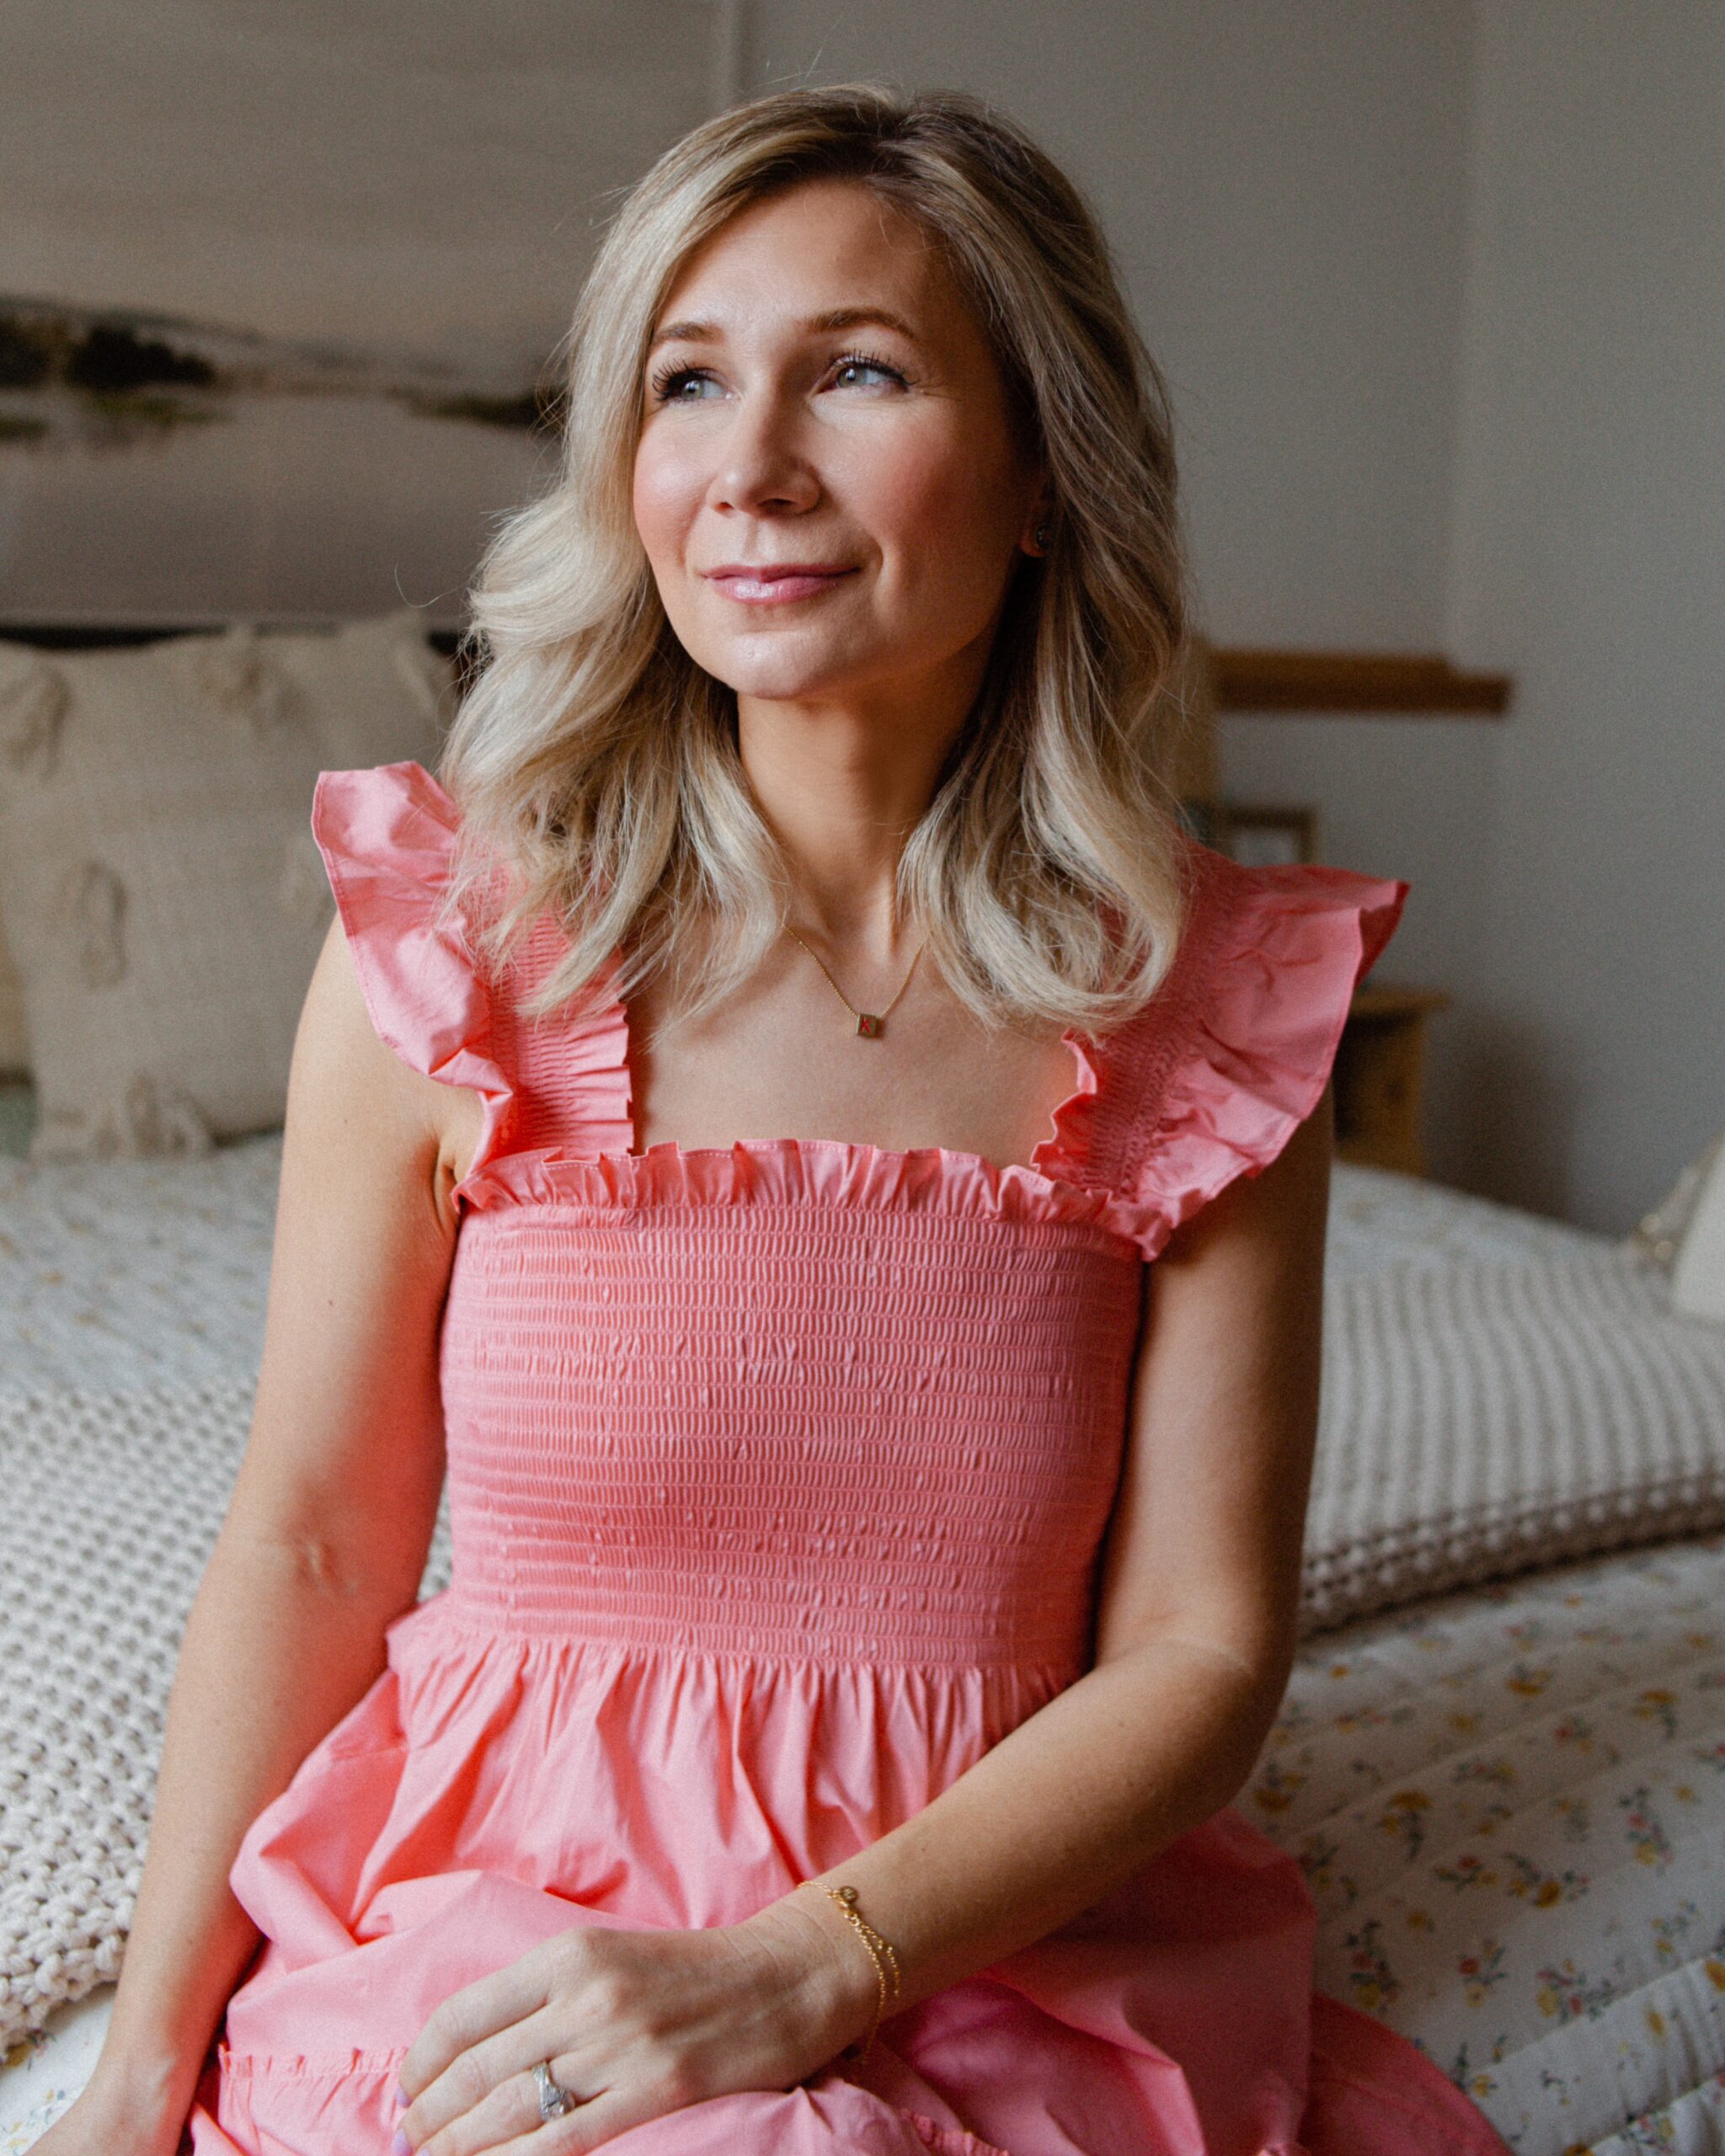 Karin Emily wears a bright pink dress while sitting on a bed sharing her Sephora VIB sale picks